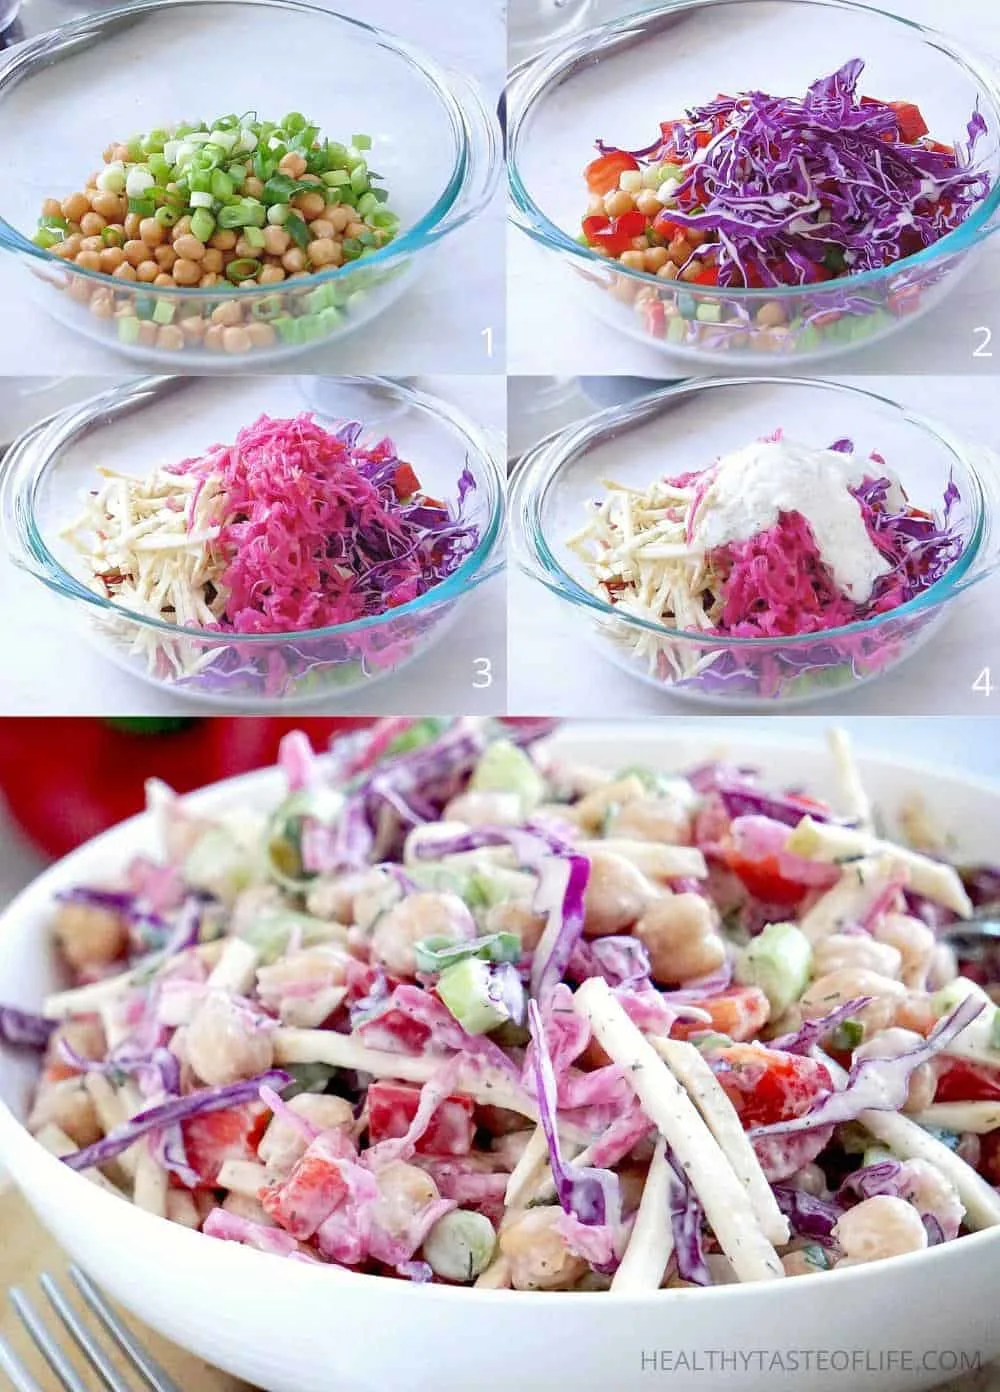 Process shots showing how to make the creamy chickpea salad with cabbage and veggies.